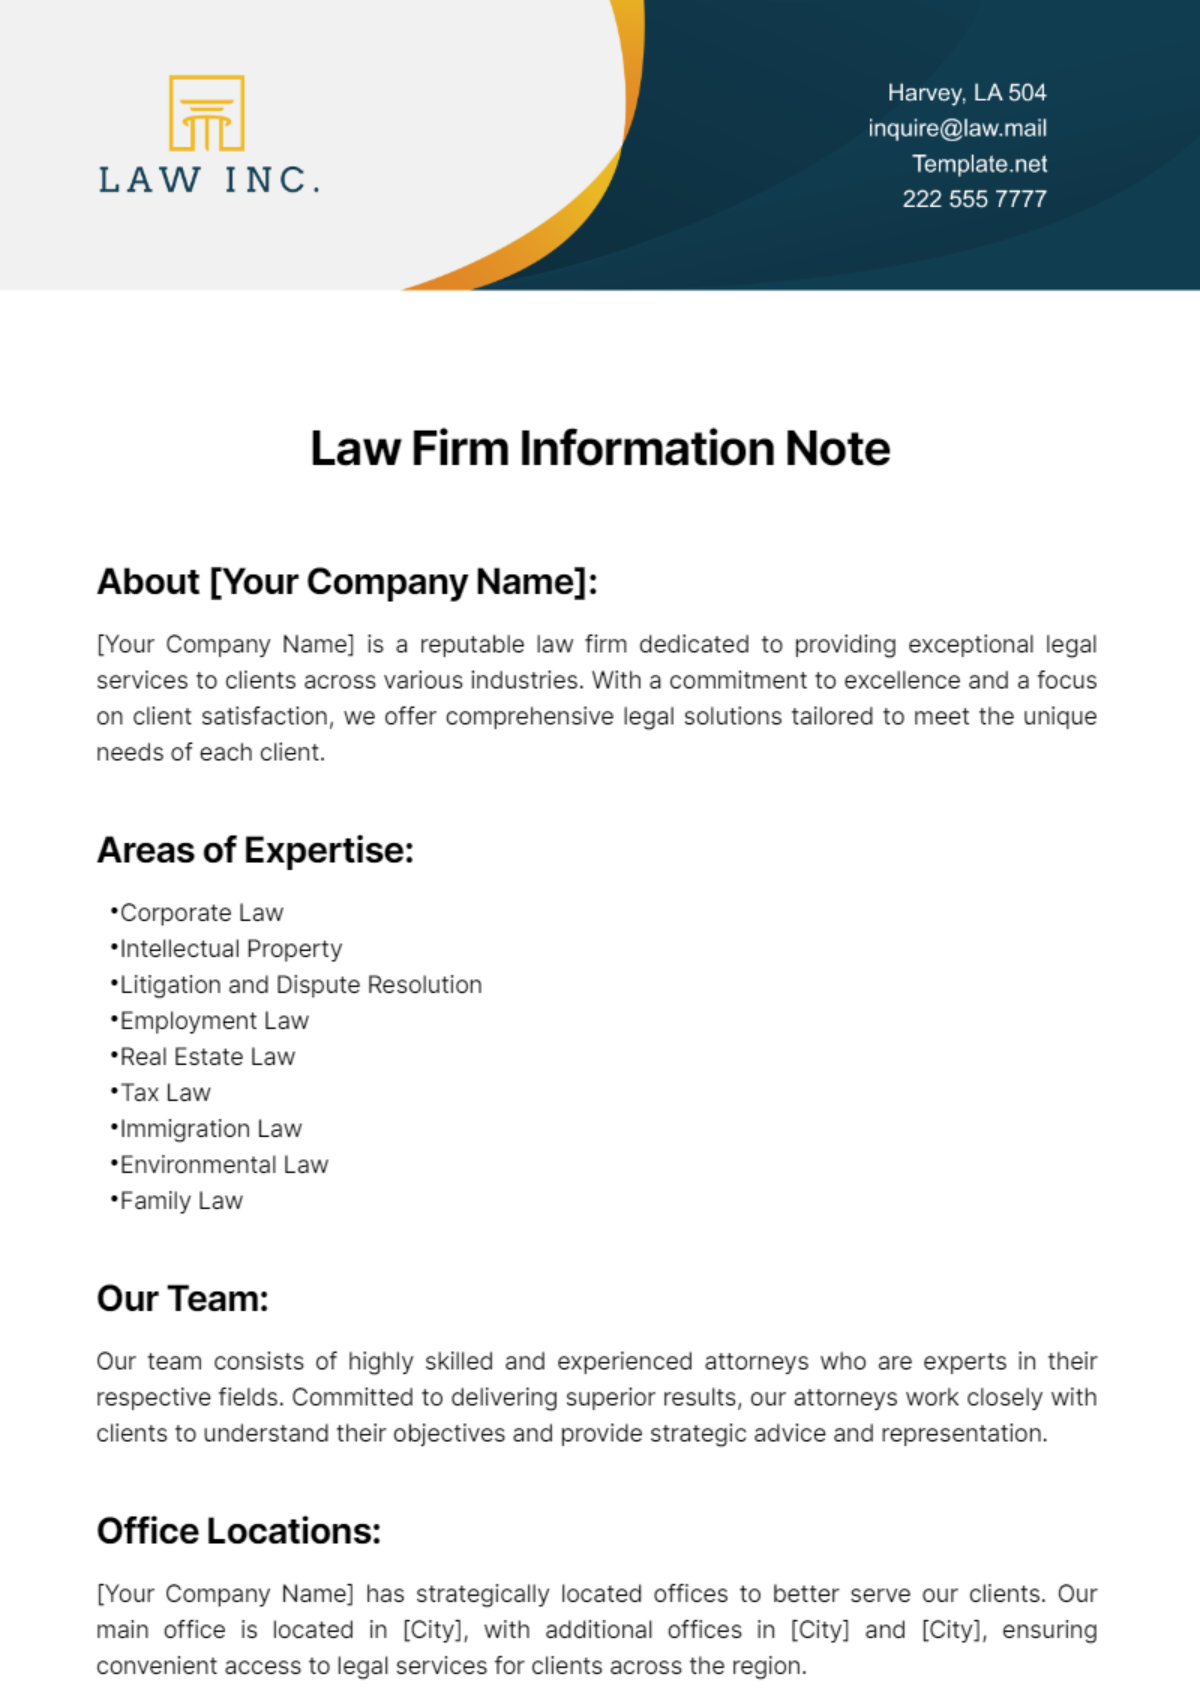 Law Firm Information Note Template